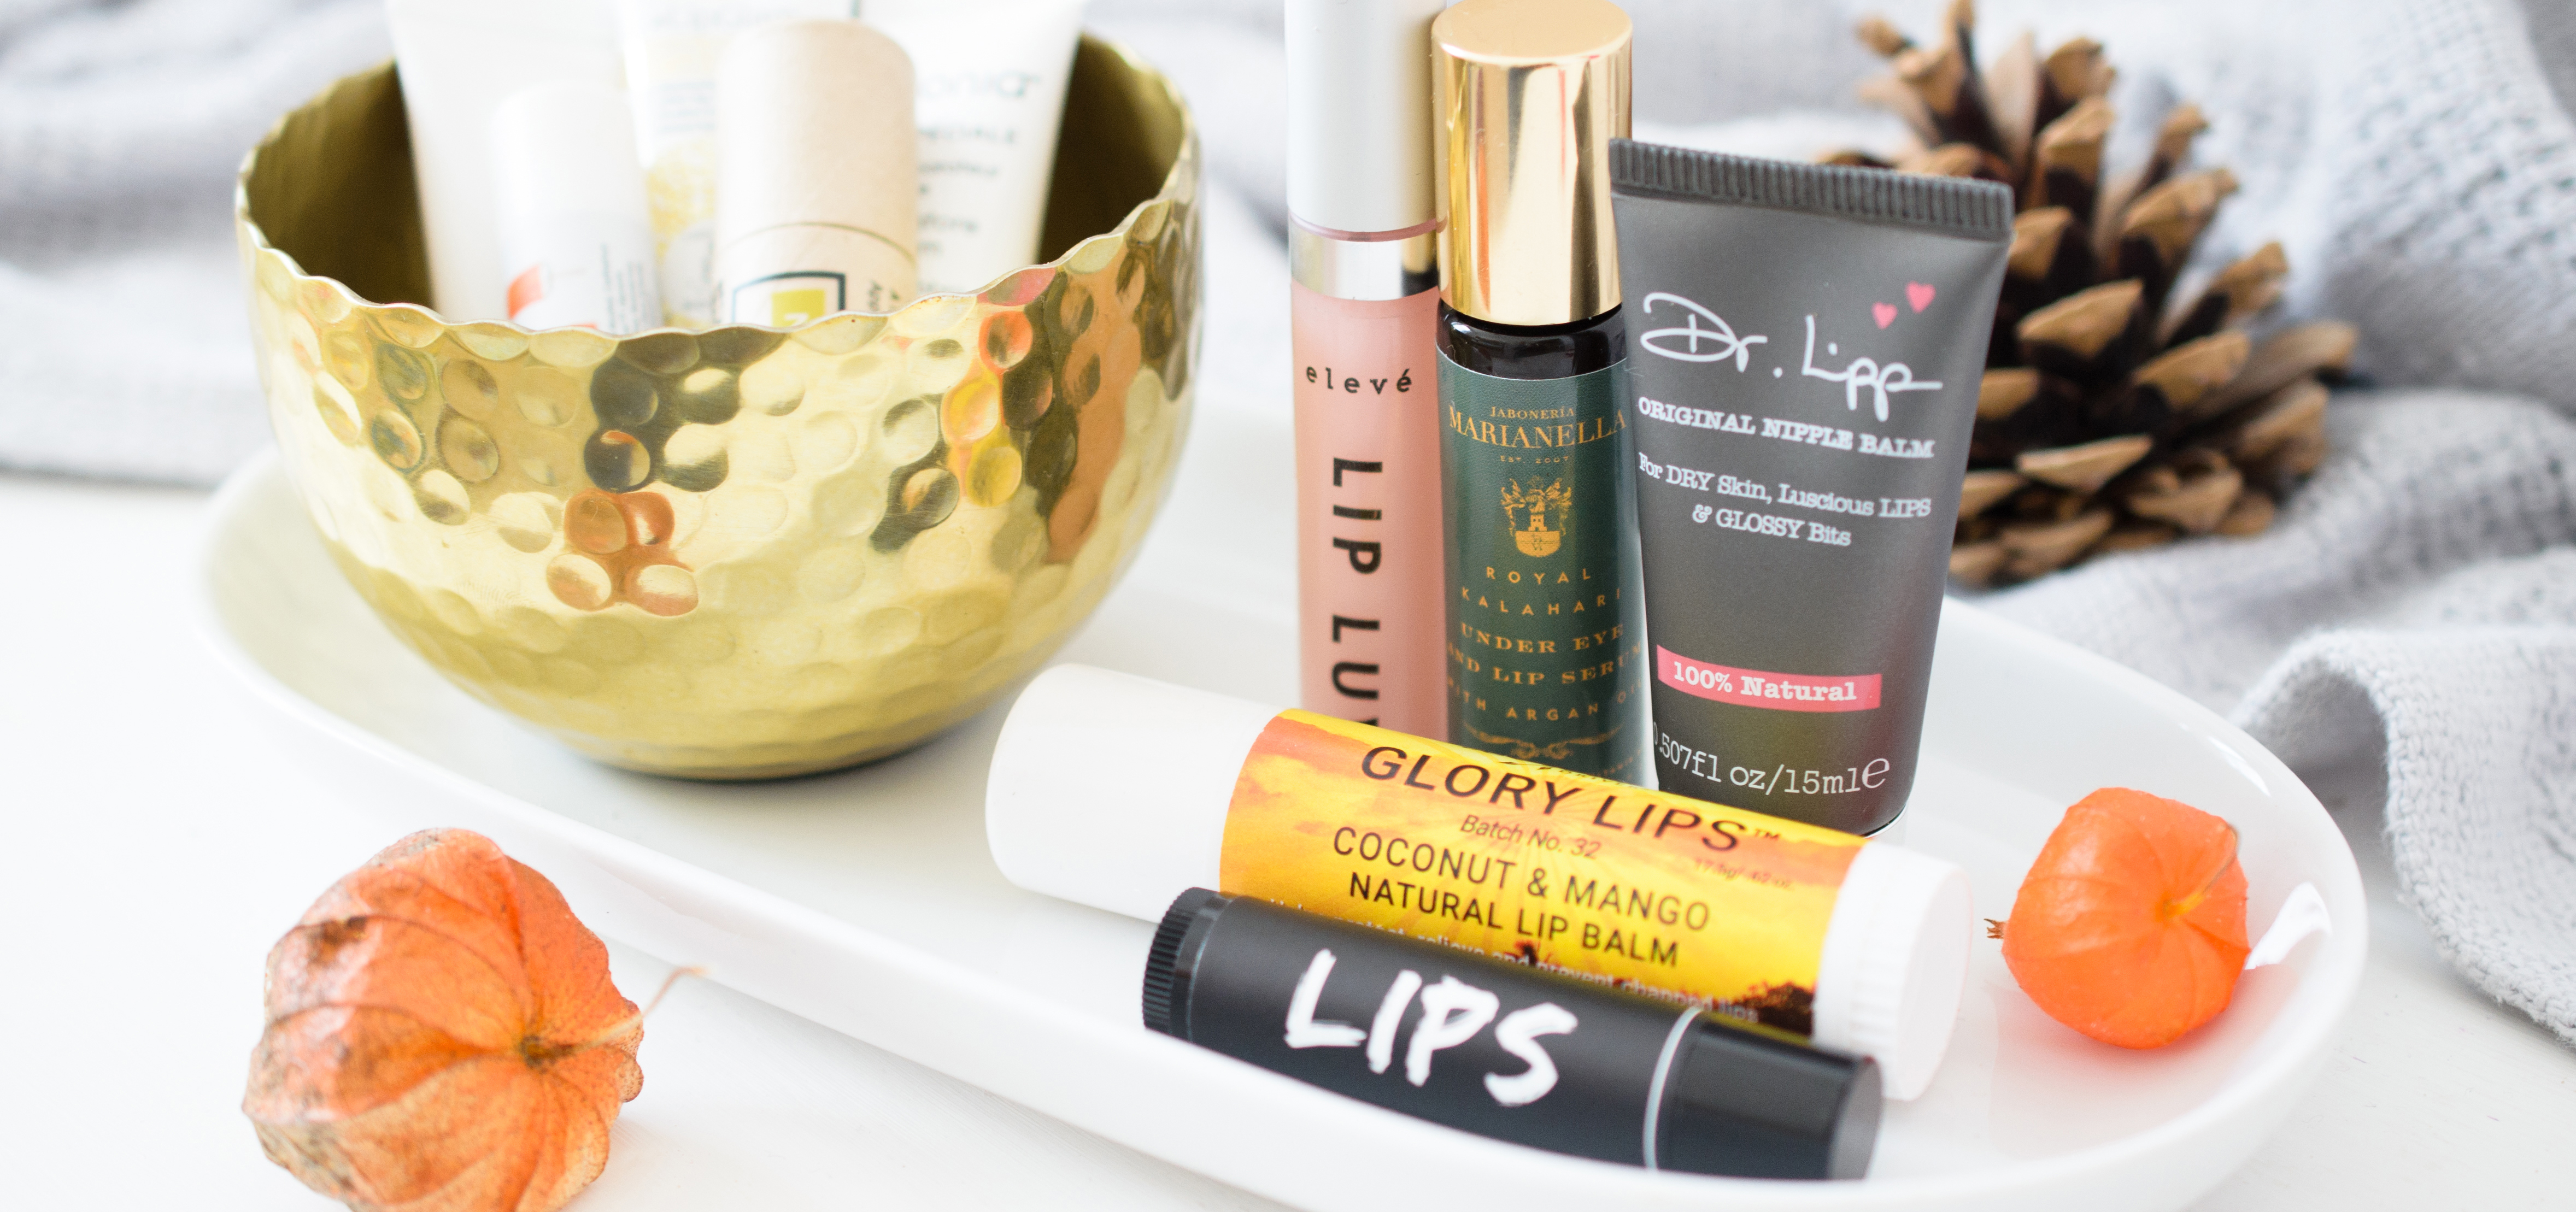 CertClean Clean Beauty Awards Judge - lip care category